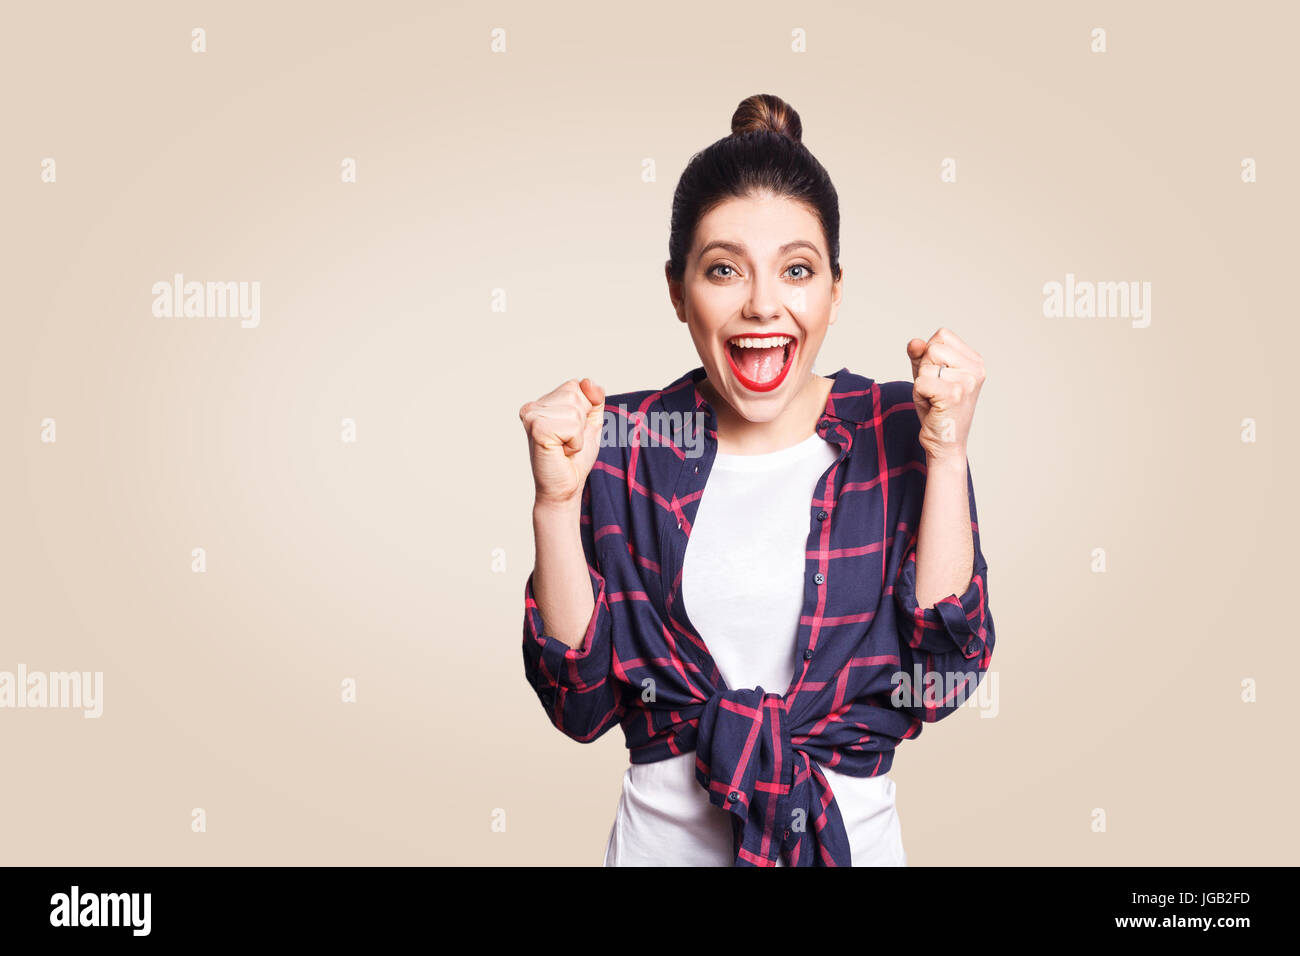 surprised portrait of happy winner ecstatic young woman with casual style having shocked look, exclaiming, keeping mouth wide open and fists clenched  Stock Photo